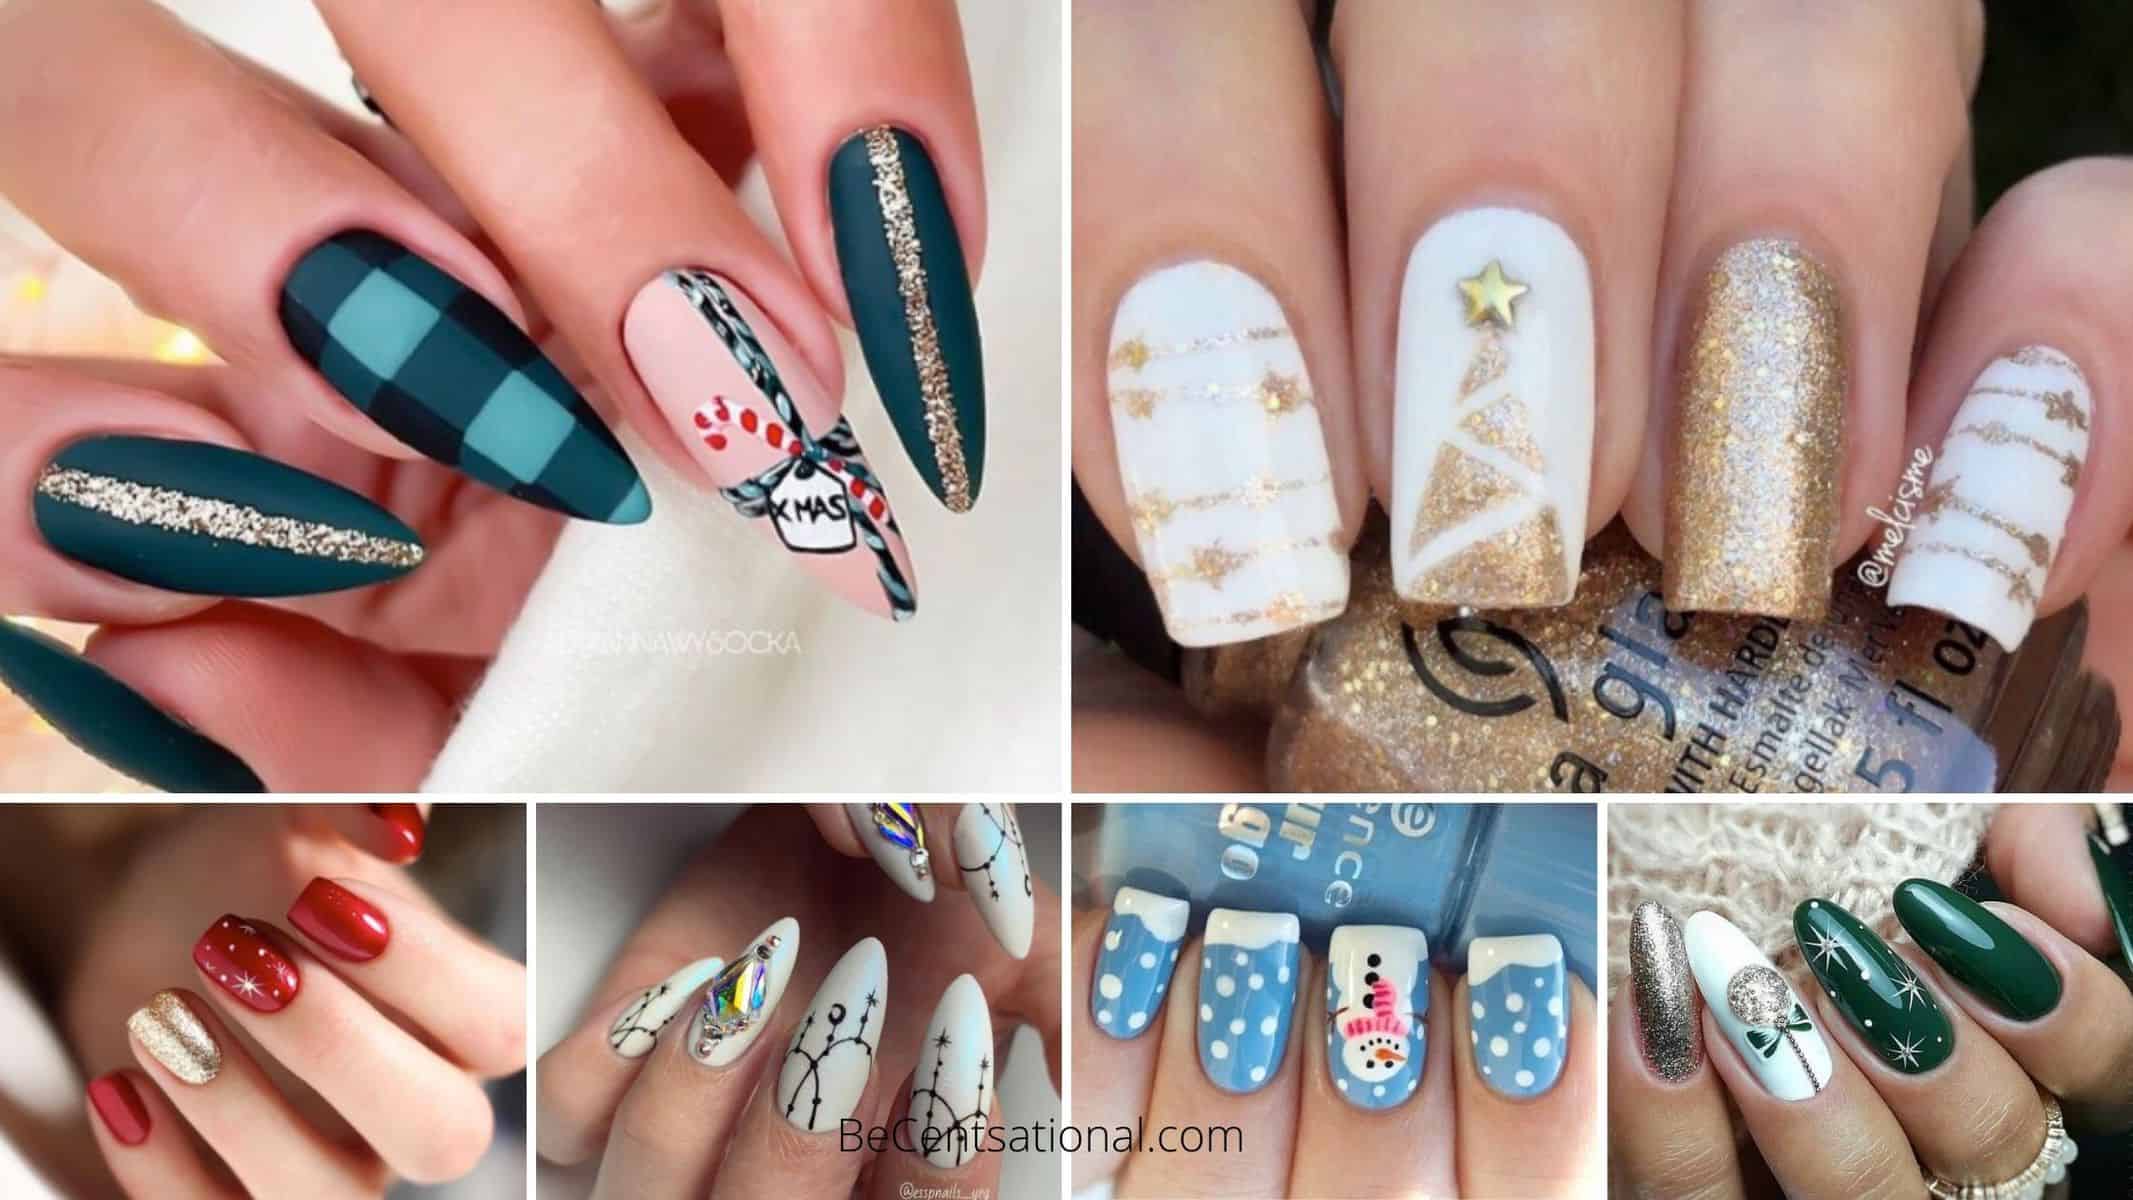 45 Christmas Nail Ideas To Try This Holiday Season - Be Centsational